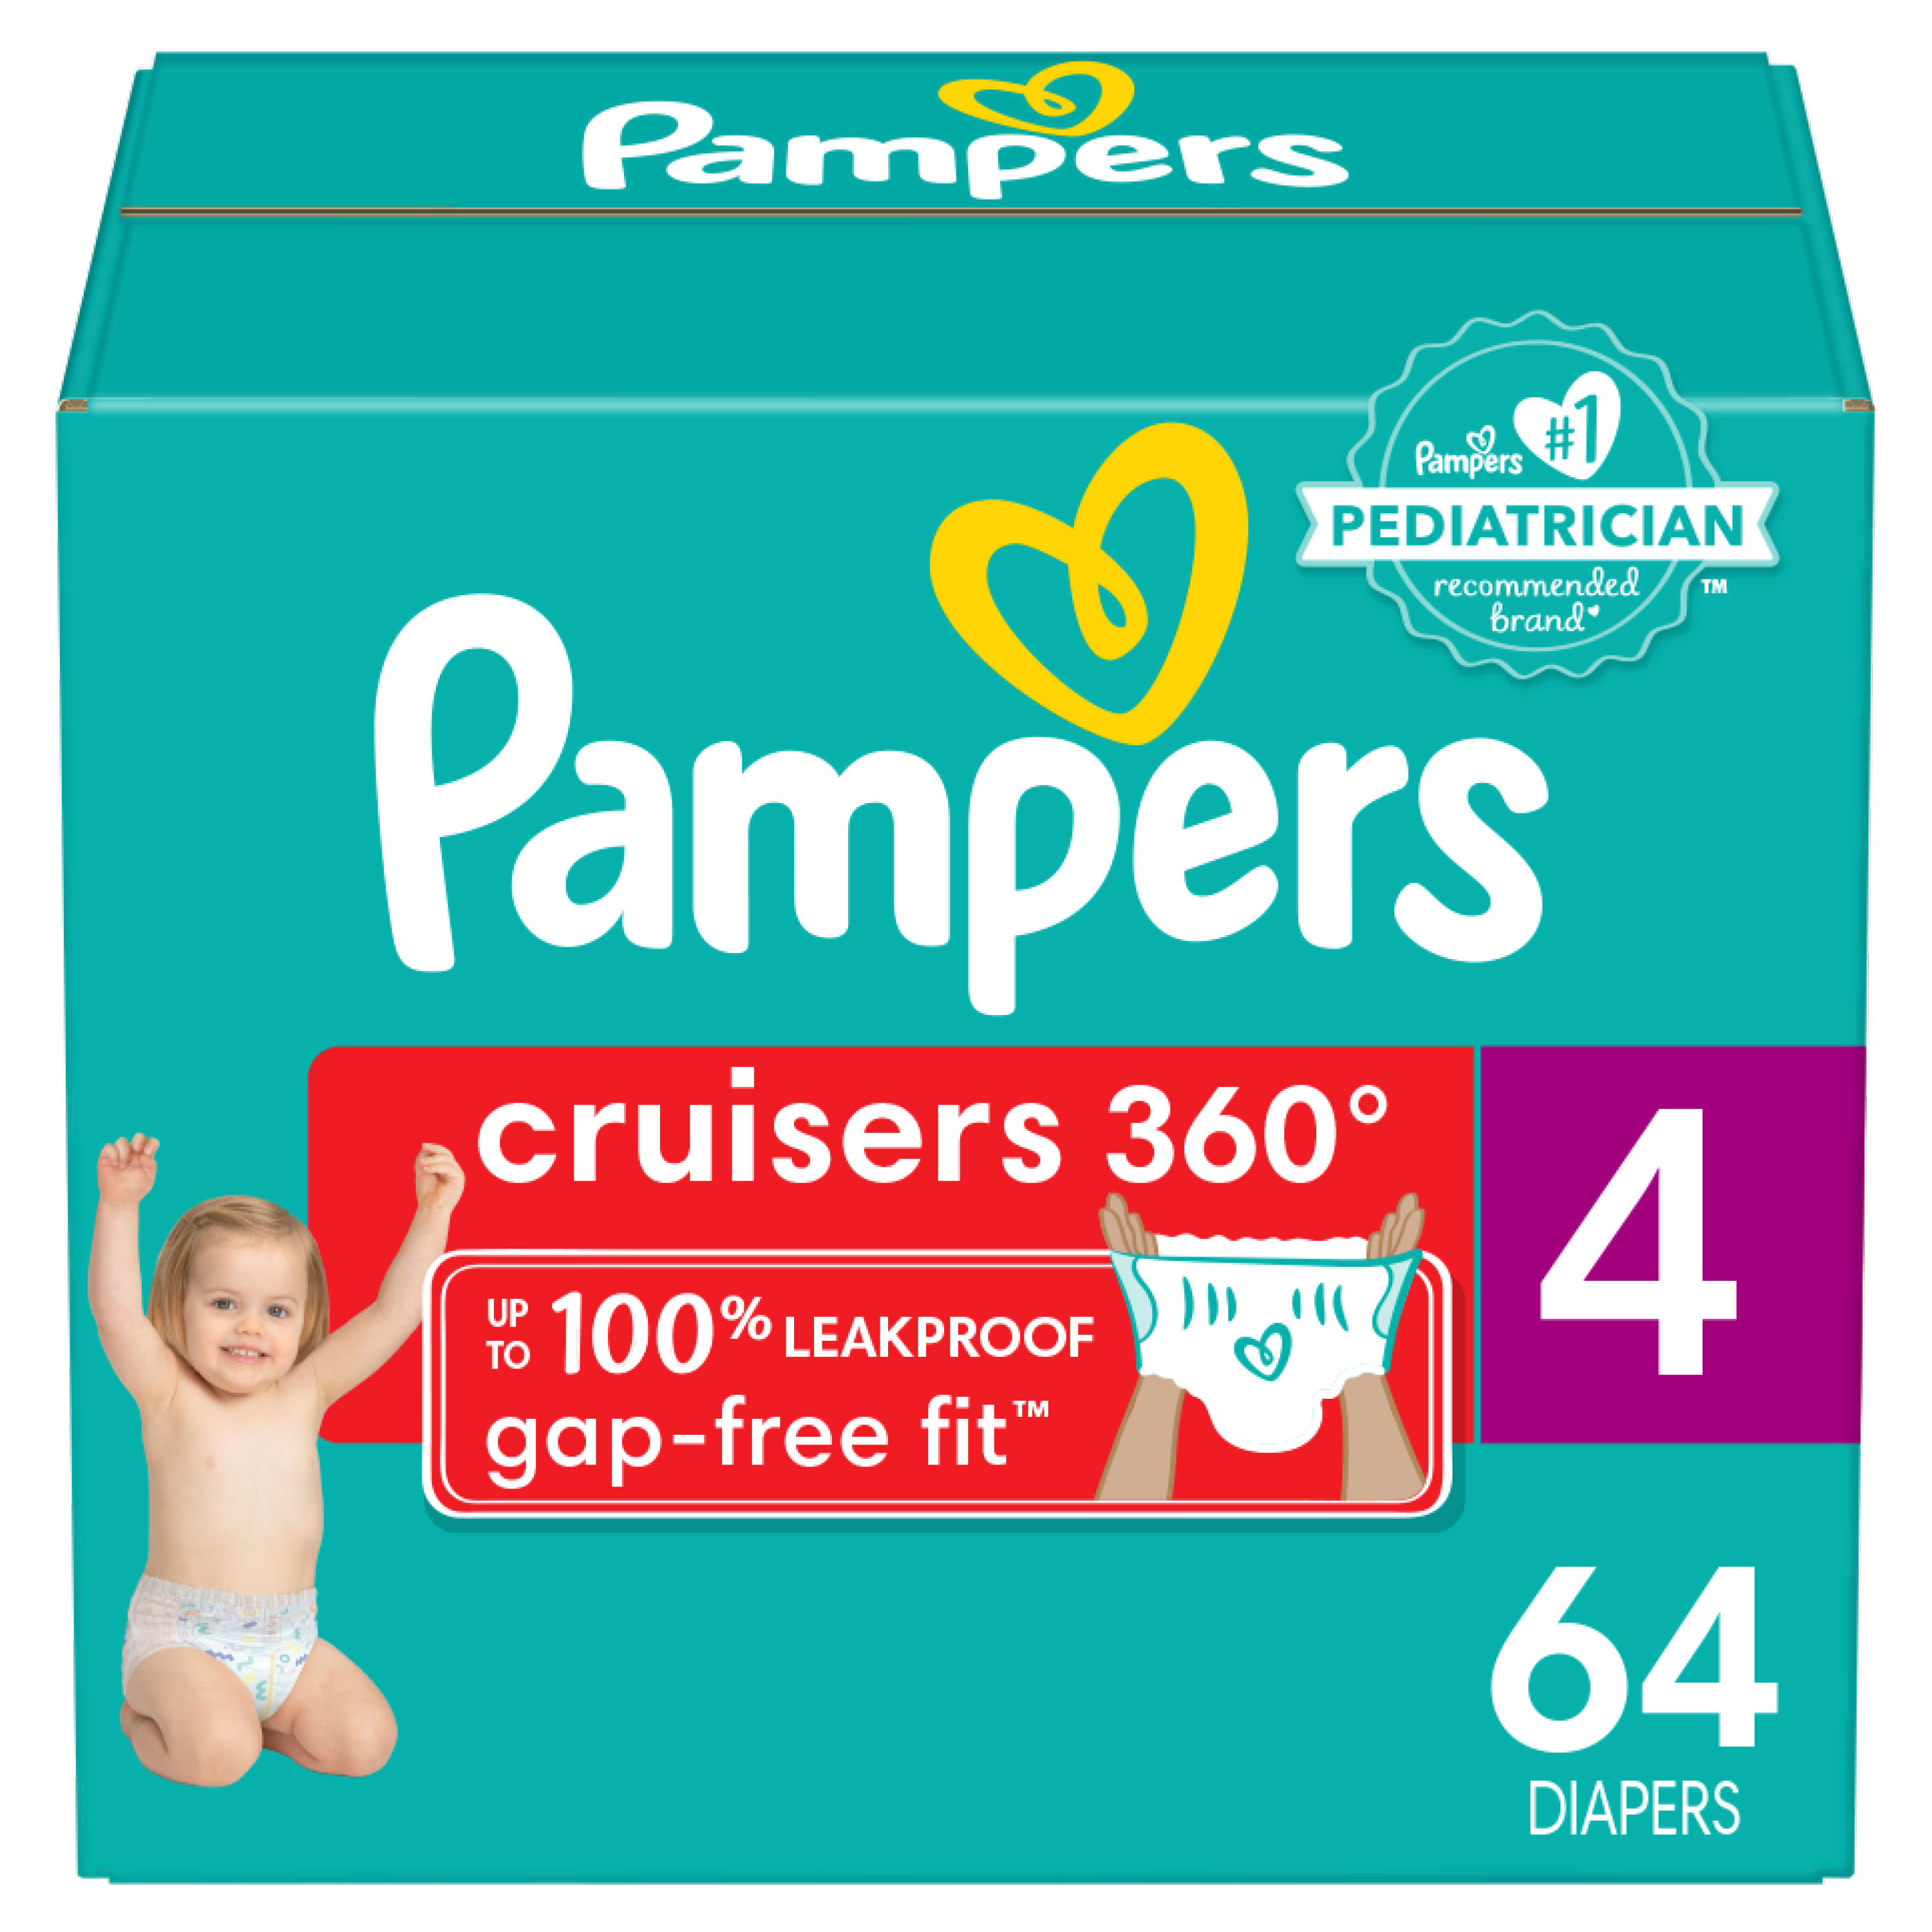 Pa-ales-Pampers-Cruisers-360-Talla-4-10-17kg-64uds-1-71371